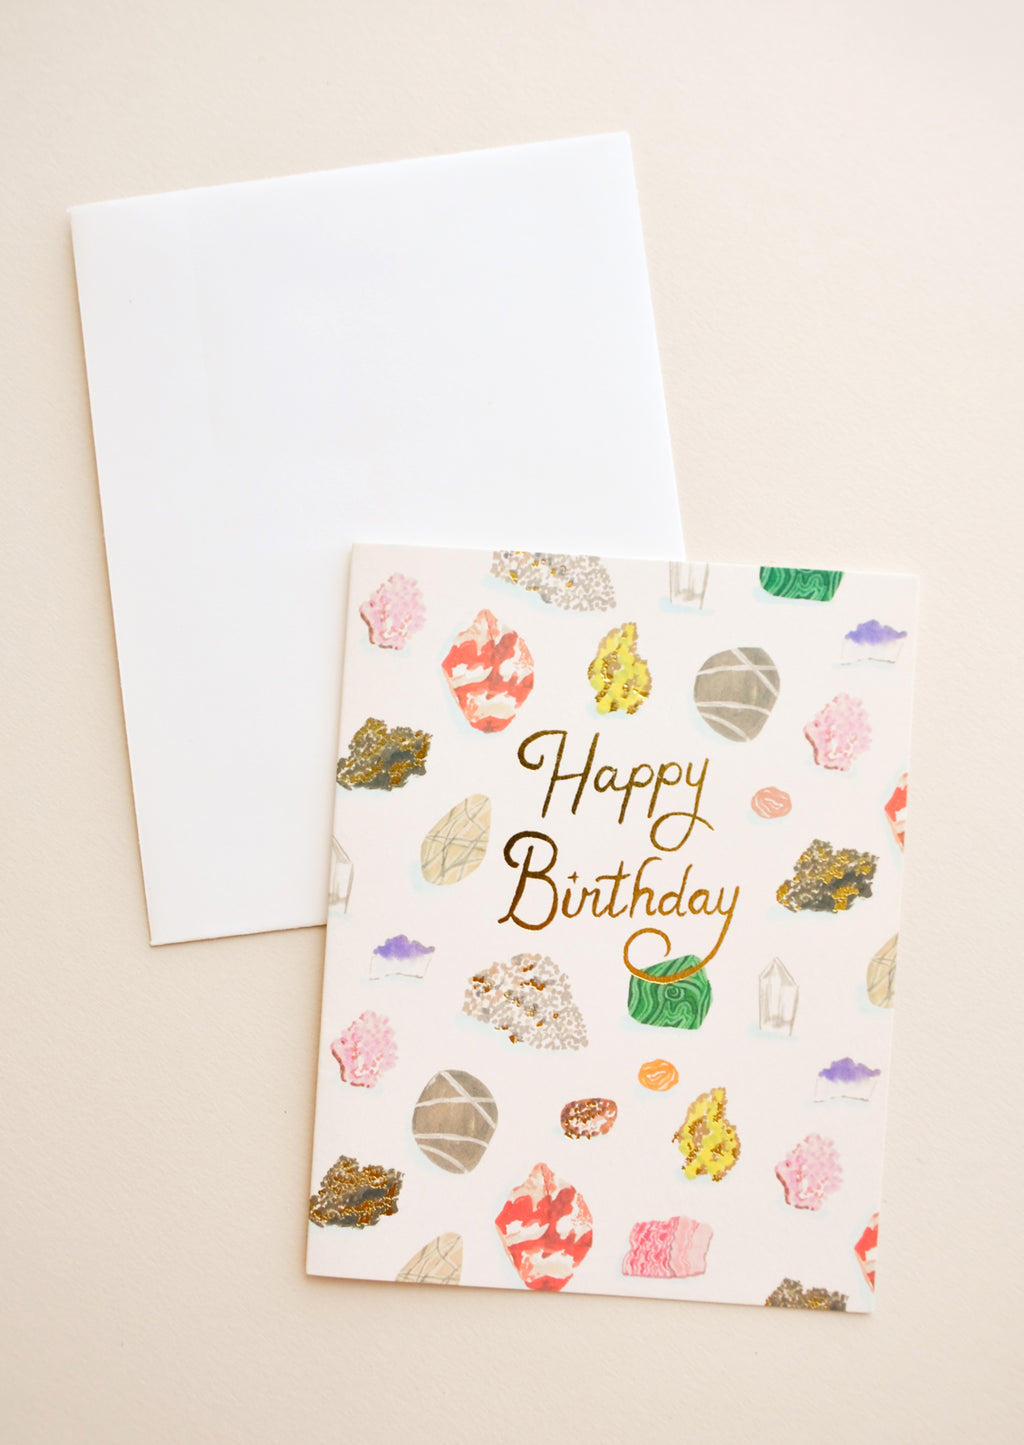 1: Notecard with colorful drawings of gems and minerals and the text "Happy Birthday" in gold foil, with white envelope.